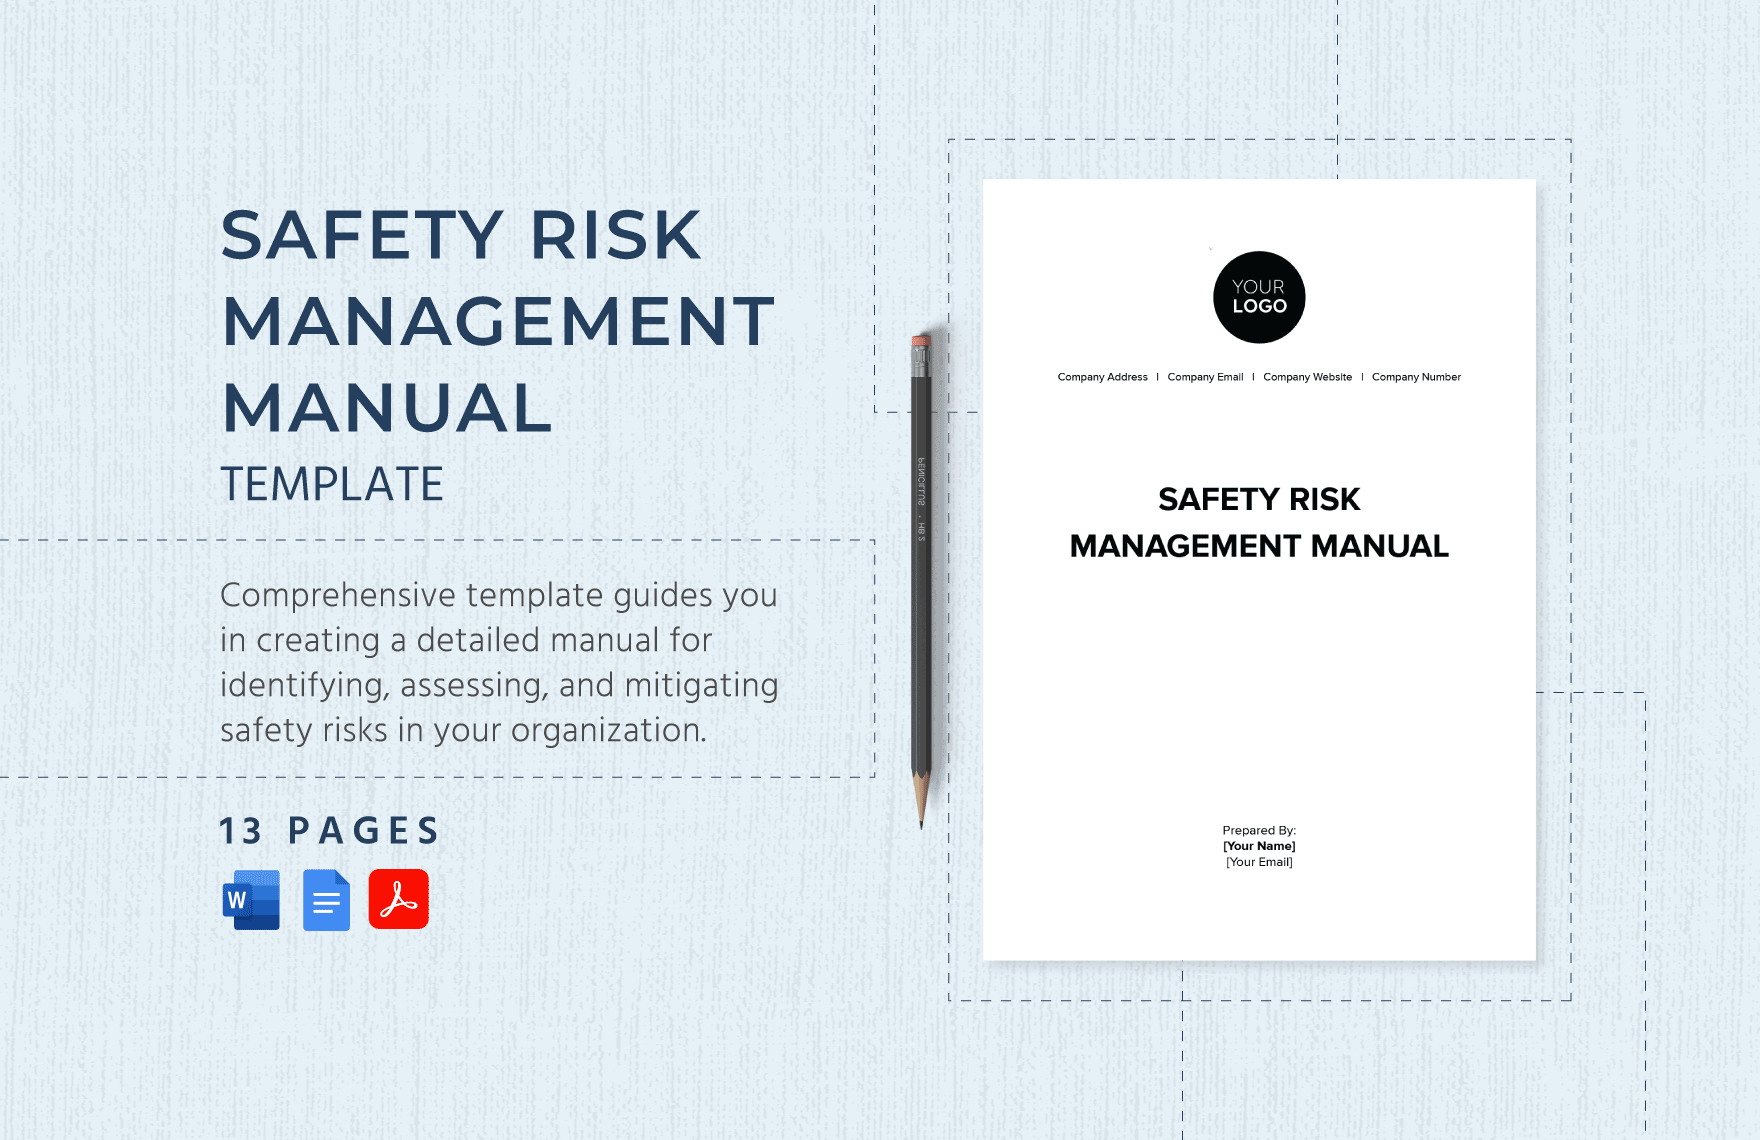 Safety Risk Management Manual Template in Word, Google Docs, PDF